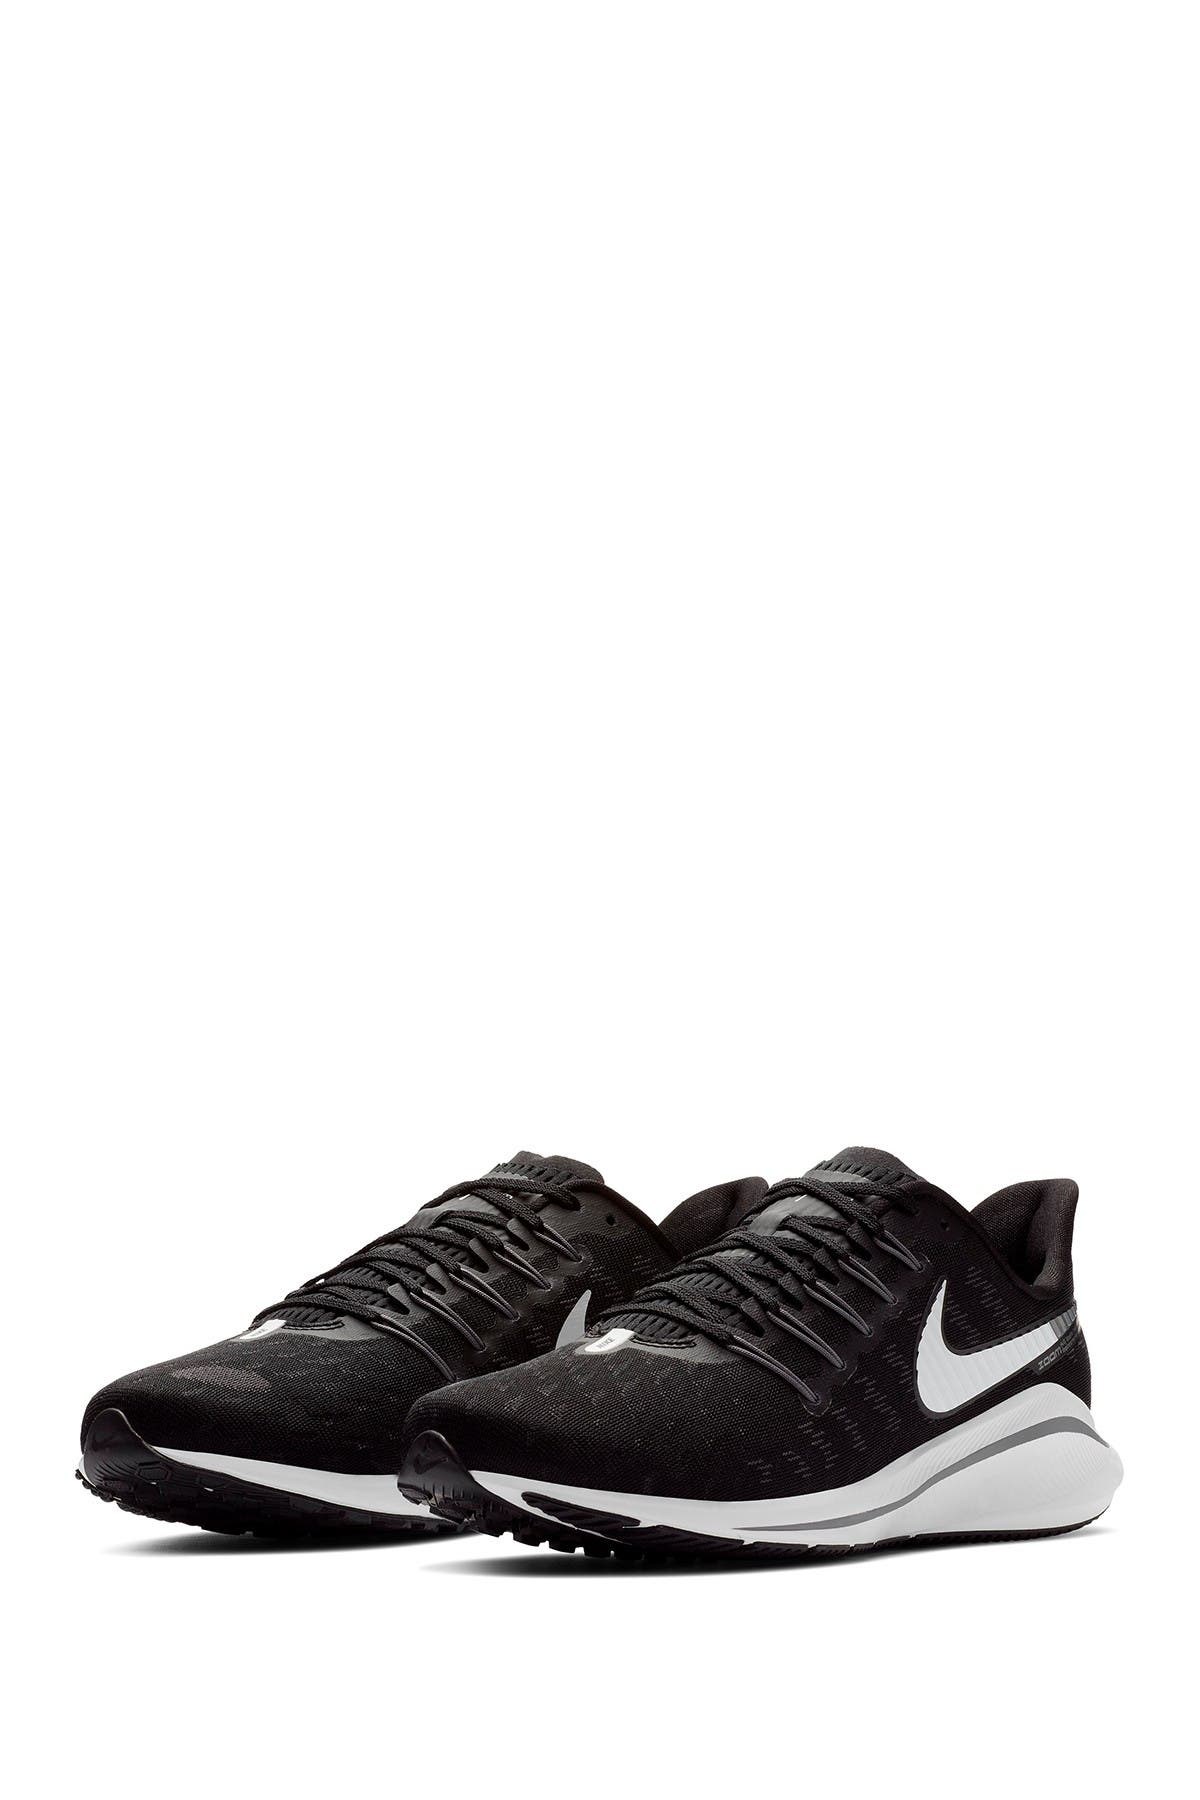 nike air zoom vomero 14 wide